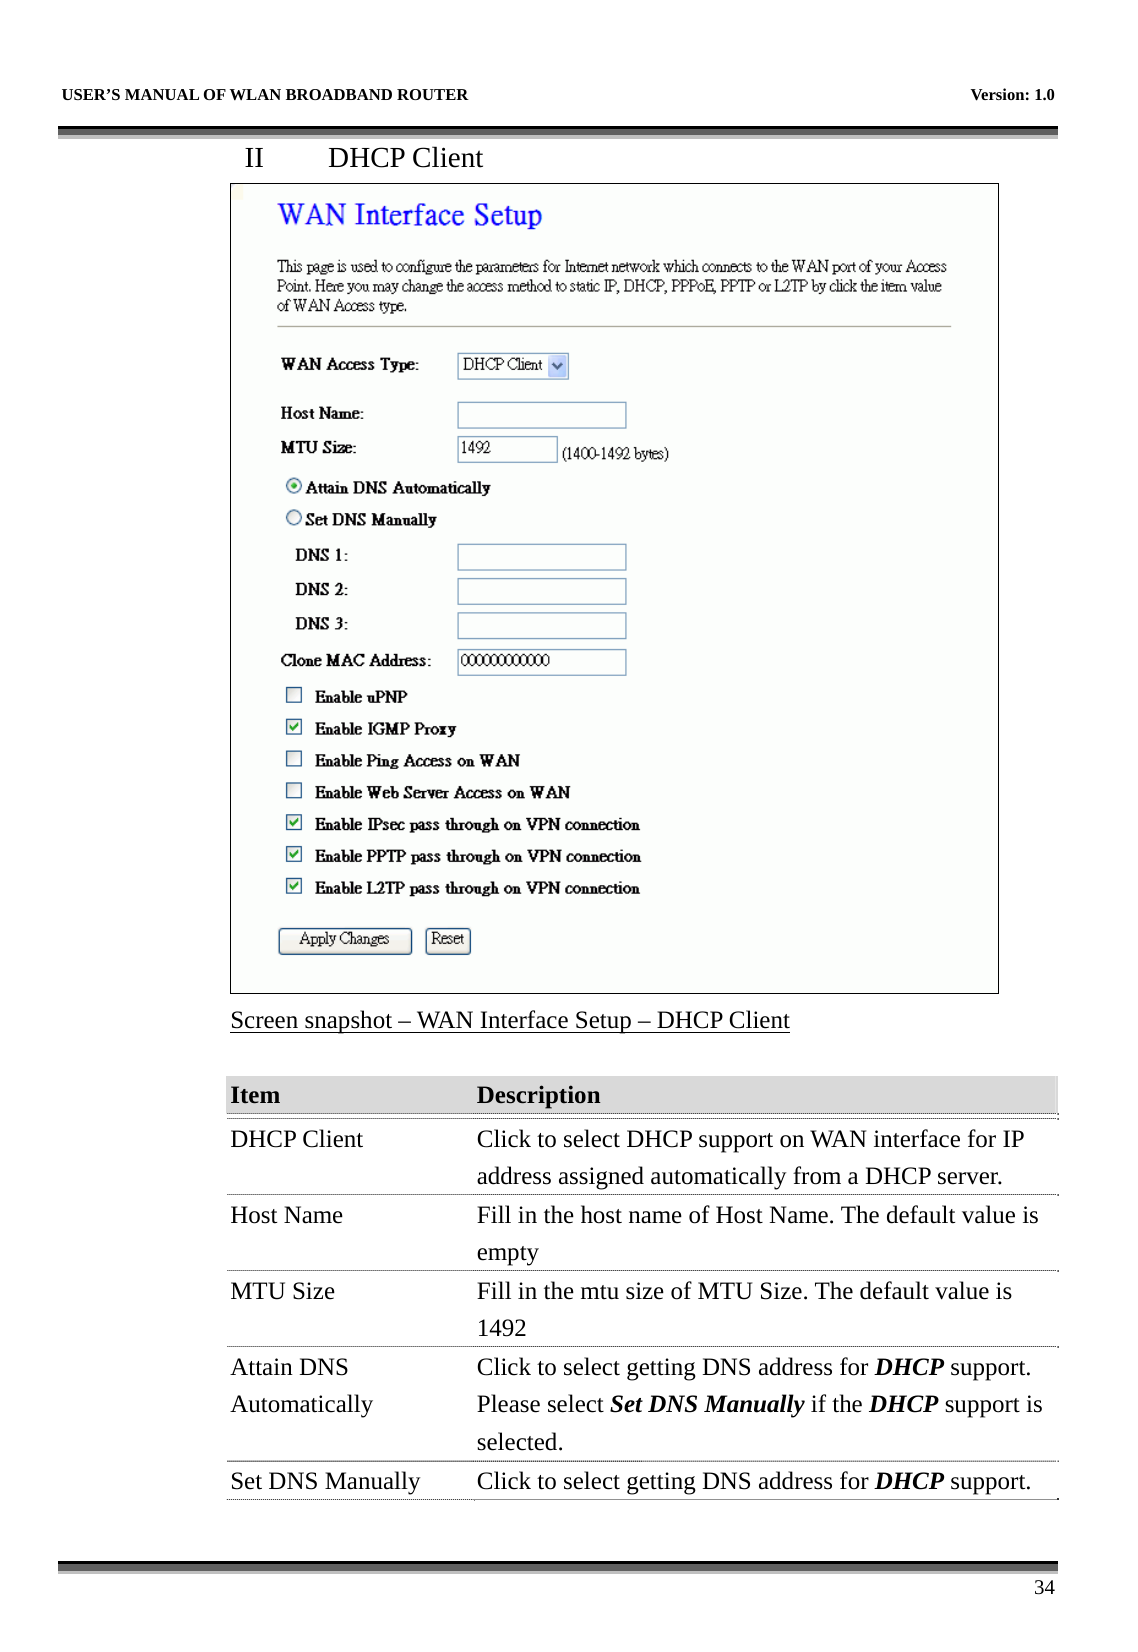   USER’S MANUAL OF WLAN BROADBAND ROUTER    Version: 1.0      34 II  DHCP Client  Screen snapshot – WAN Interface Setup – DHCP Client  Item  Description   DHCP Client  Click to select DHCP support on WAN interface for IP address assigned automatically from a DHCP server. Host Name  Fill in the host name of Host Name. The default value is empty MTU Size  Fill in the mtu size of MTU Size. The default value is 1492 Attain DNS Automatically Click to select getting DNS address for DHCP support. Please select Set DNS Manually if the DHCP support is selected. Set DNS Manually  Click to select getting DNS address for DHCP support. 